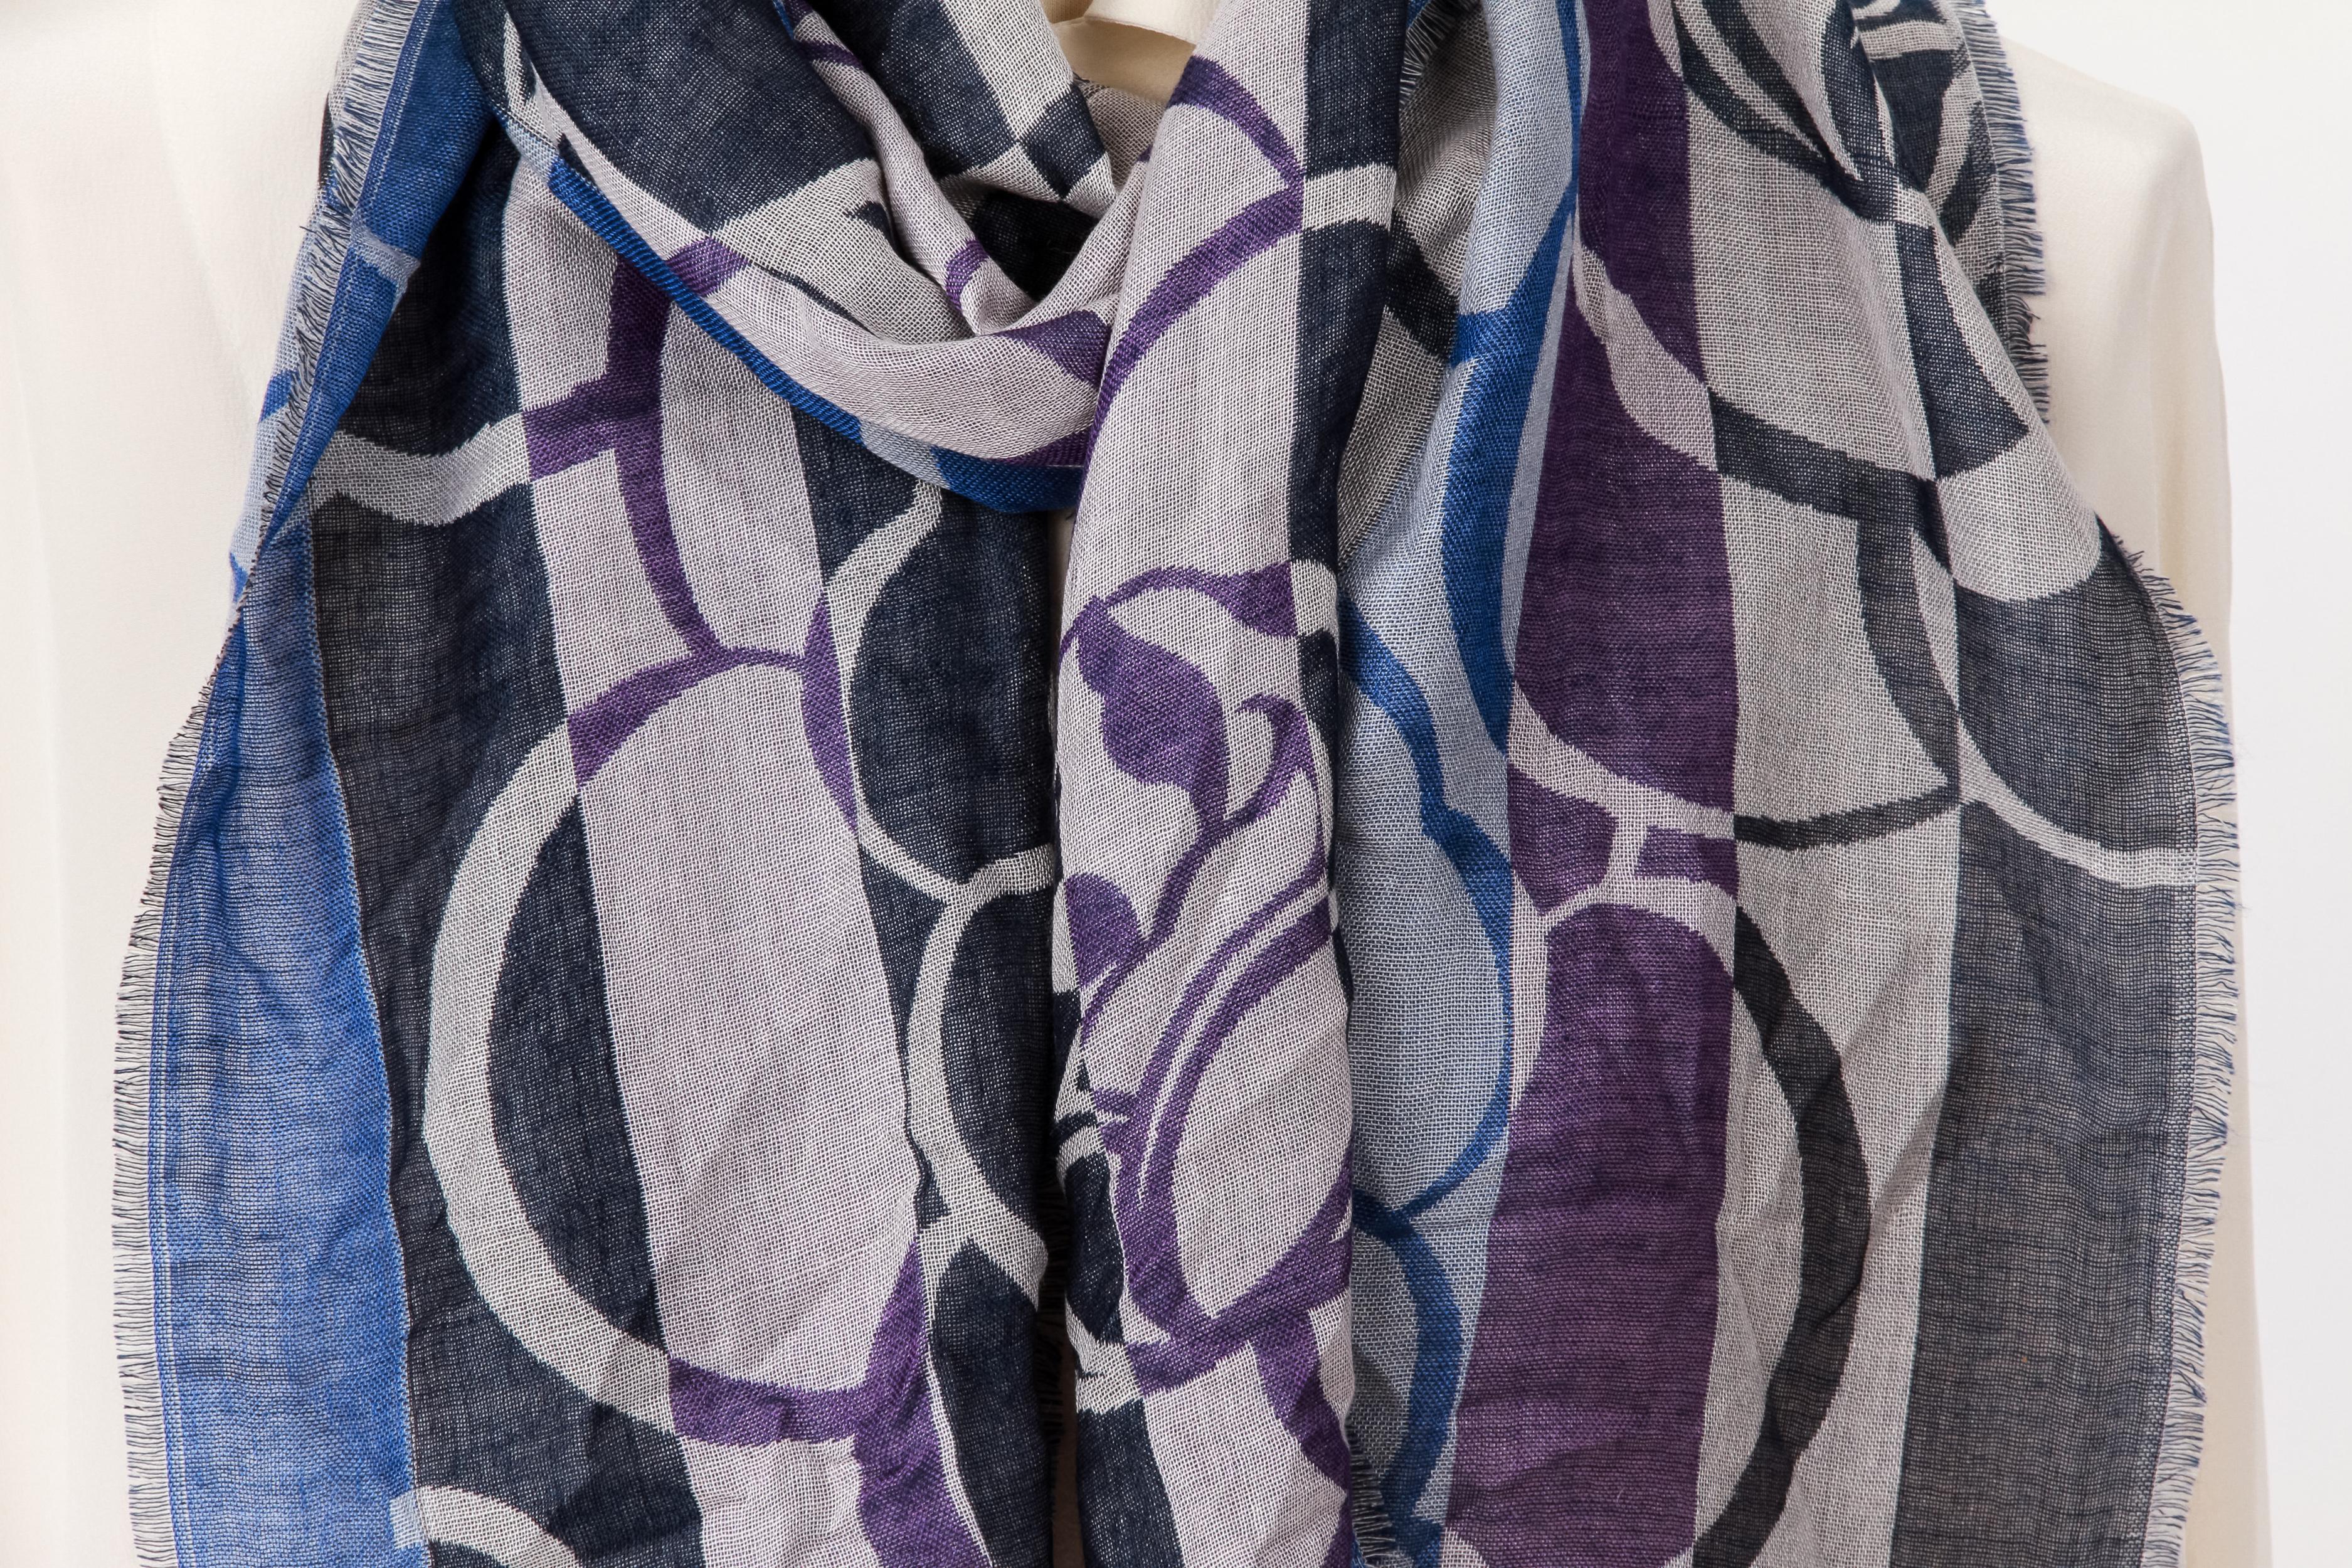  Chanel Floral Stripe Cashmere Silk Scarf
Multicolor in blue, purple, gray and dark blue and Chanel logos.cashmere and silk. Measurements 71 L x 16 H
